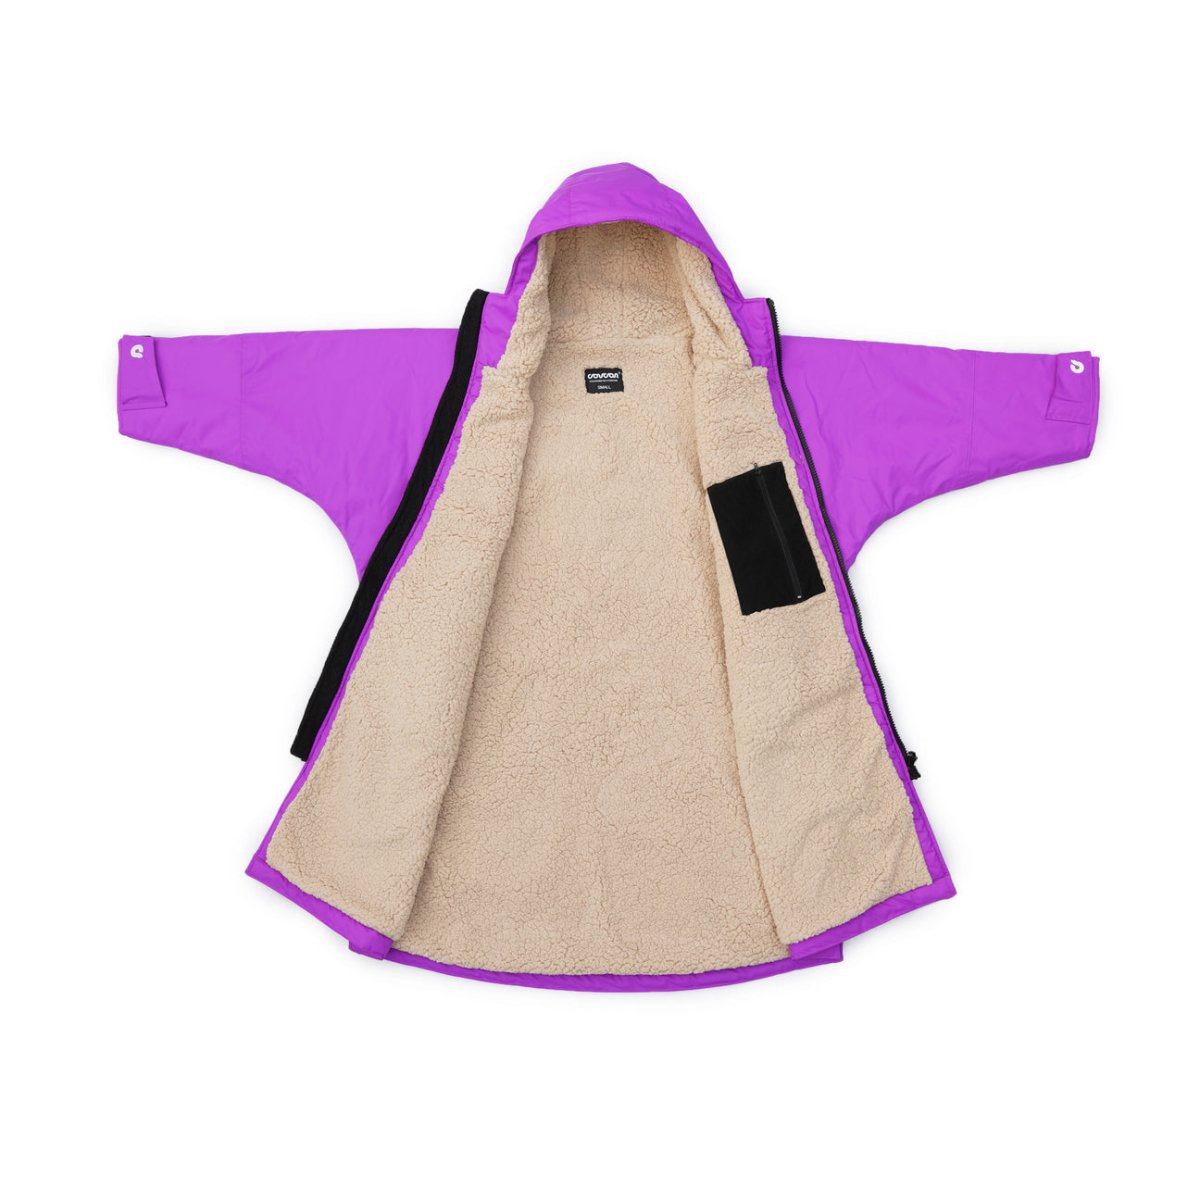 COUCON CHANGING ROBE KIDS LONG SLEEVE - MAGENTA PURPLE